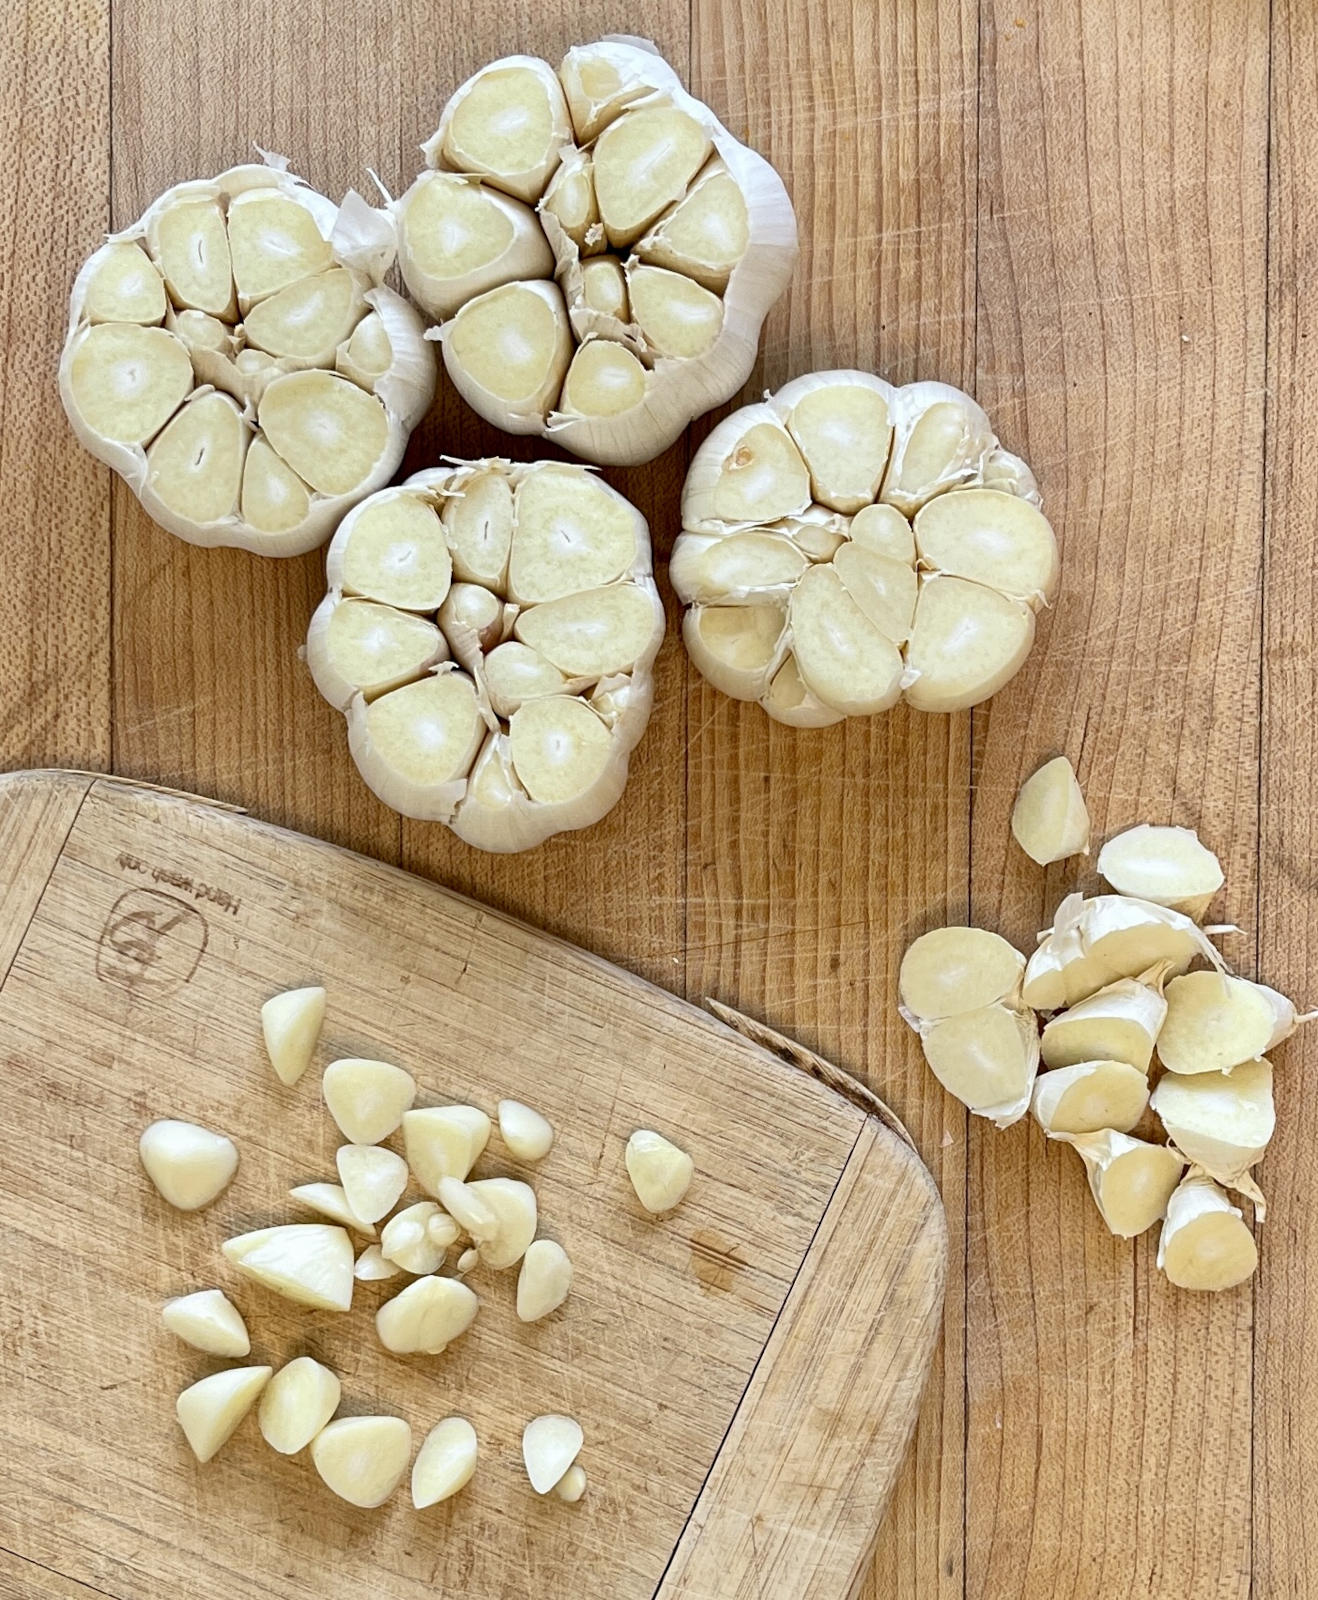 Four heads of garlic with the tops sliced off. The slices are sitting in two piles. Everything sits on light wooden cutting boards.